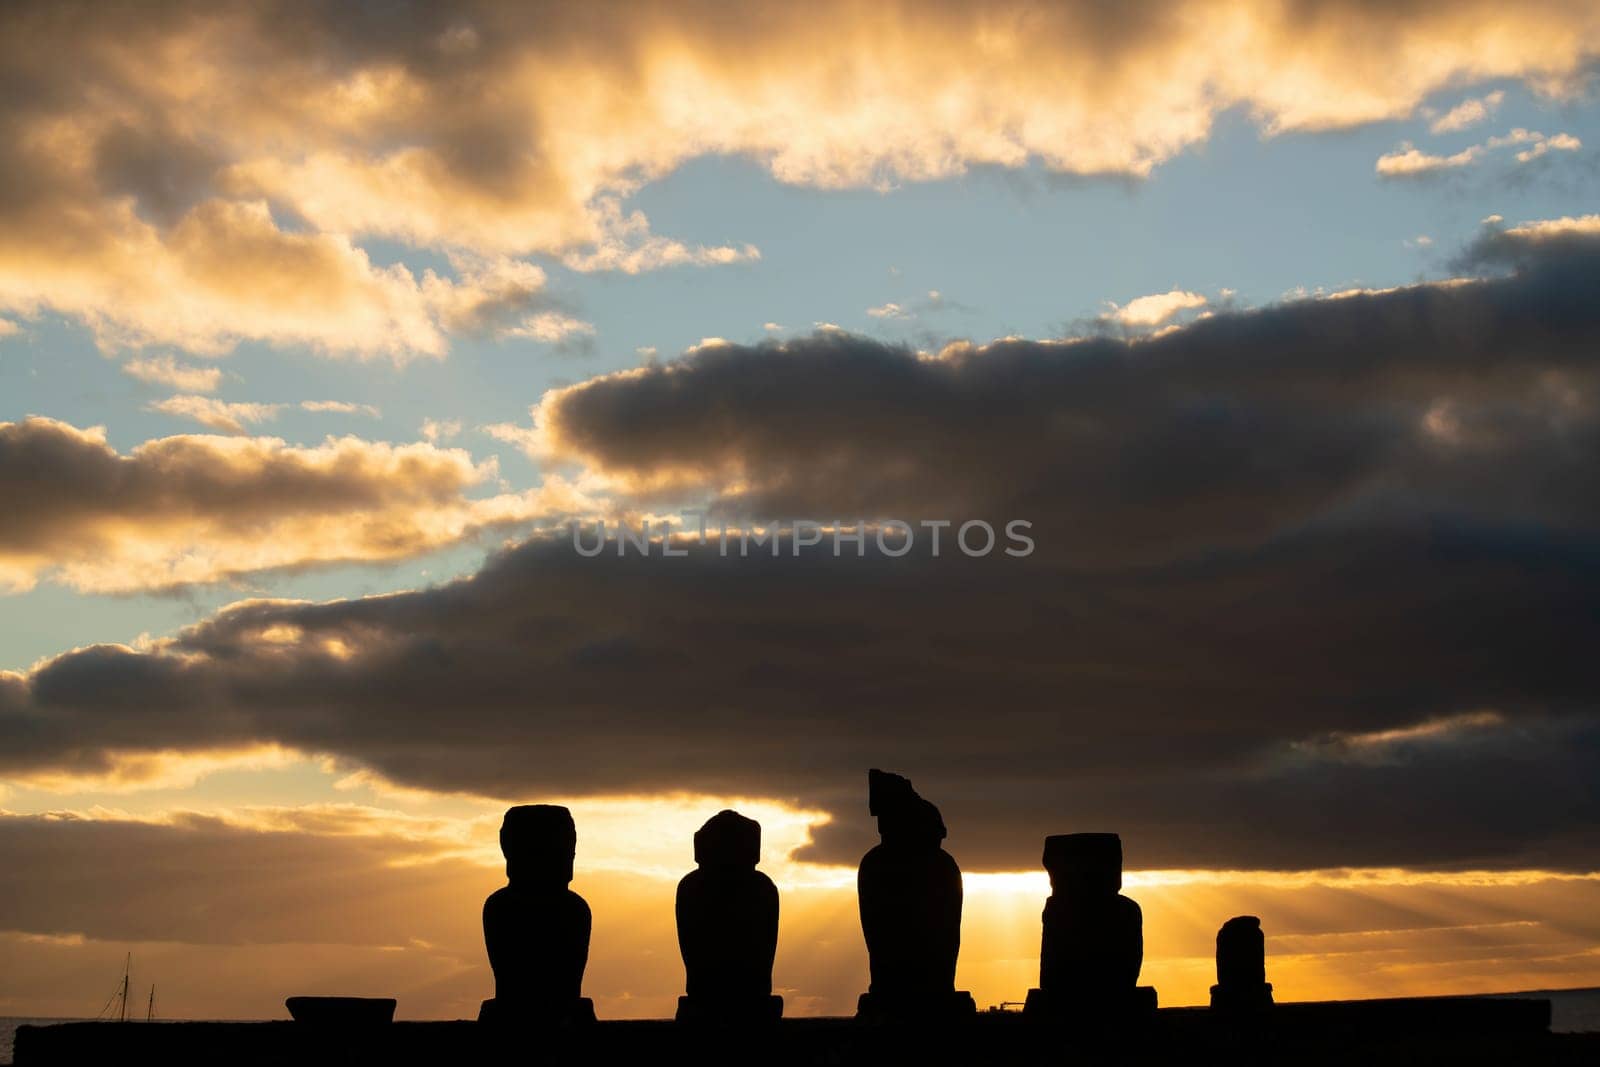 Silhouette shot of the ancient moai on Easter Island in Chile at sunset